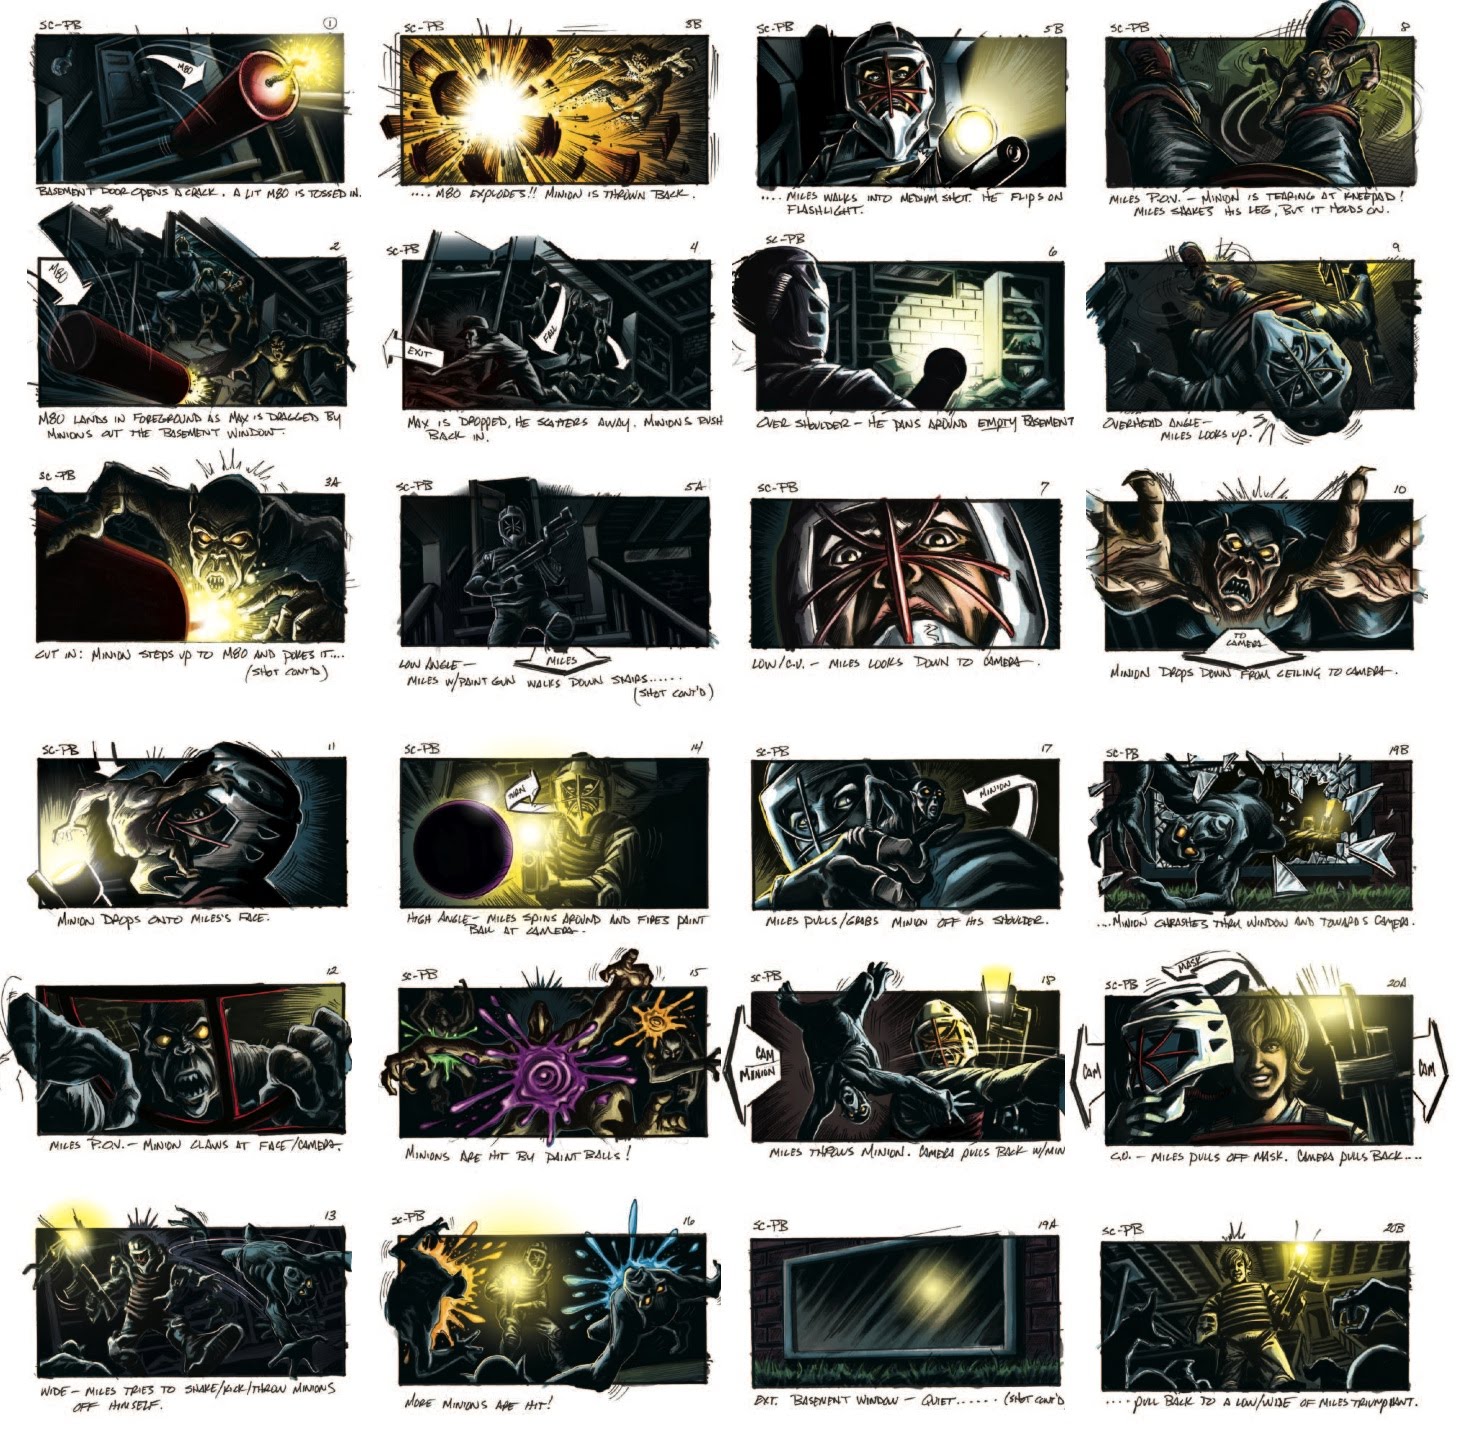 The Gate 3D movie storyboards directed by Alex Winter